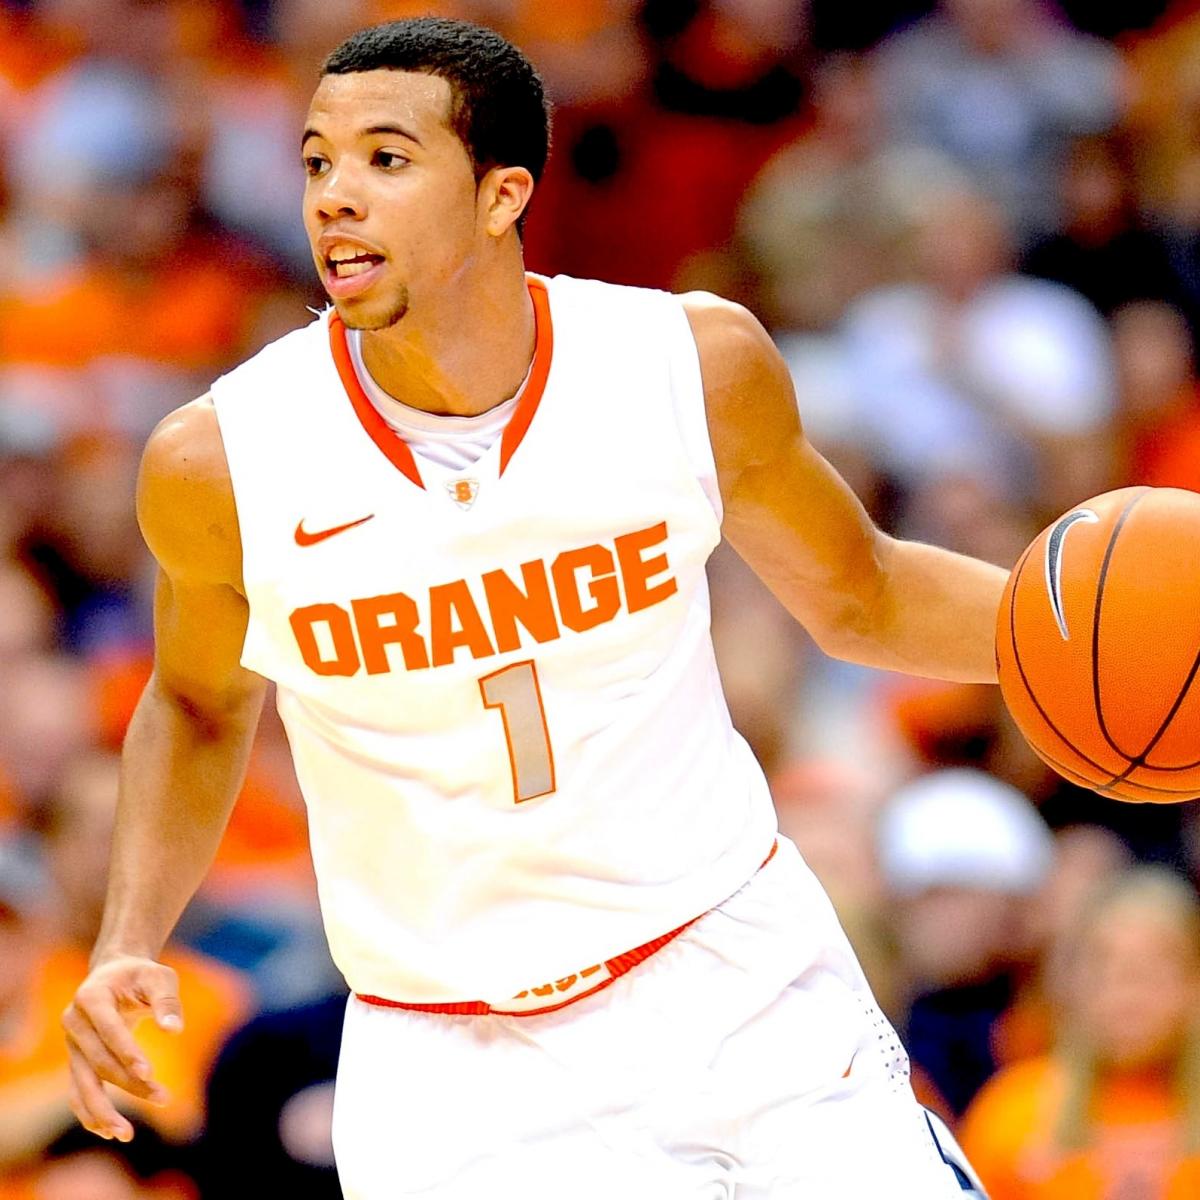 Predicting the 10 Most Improved College Basketball Players in 2012-13